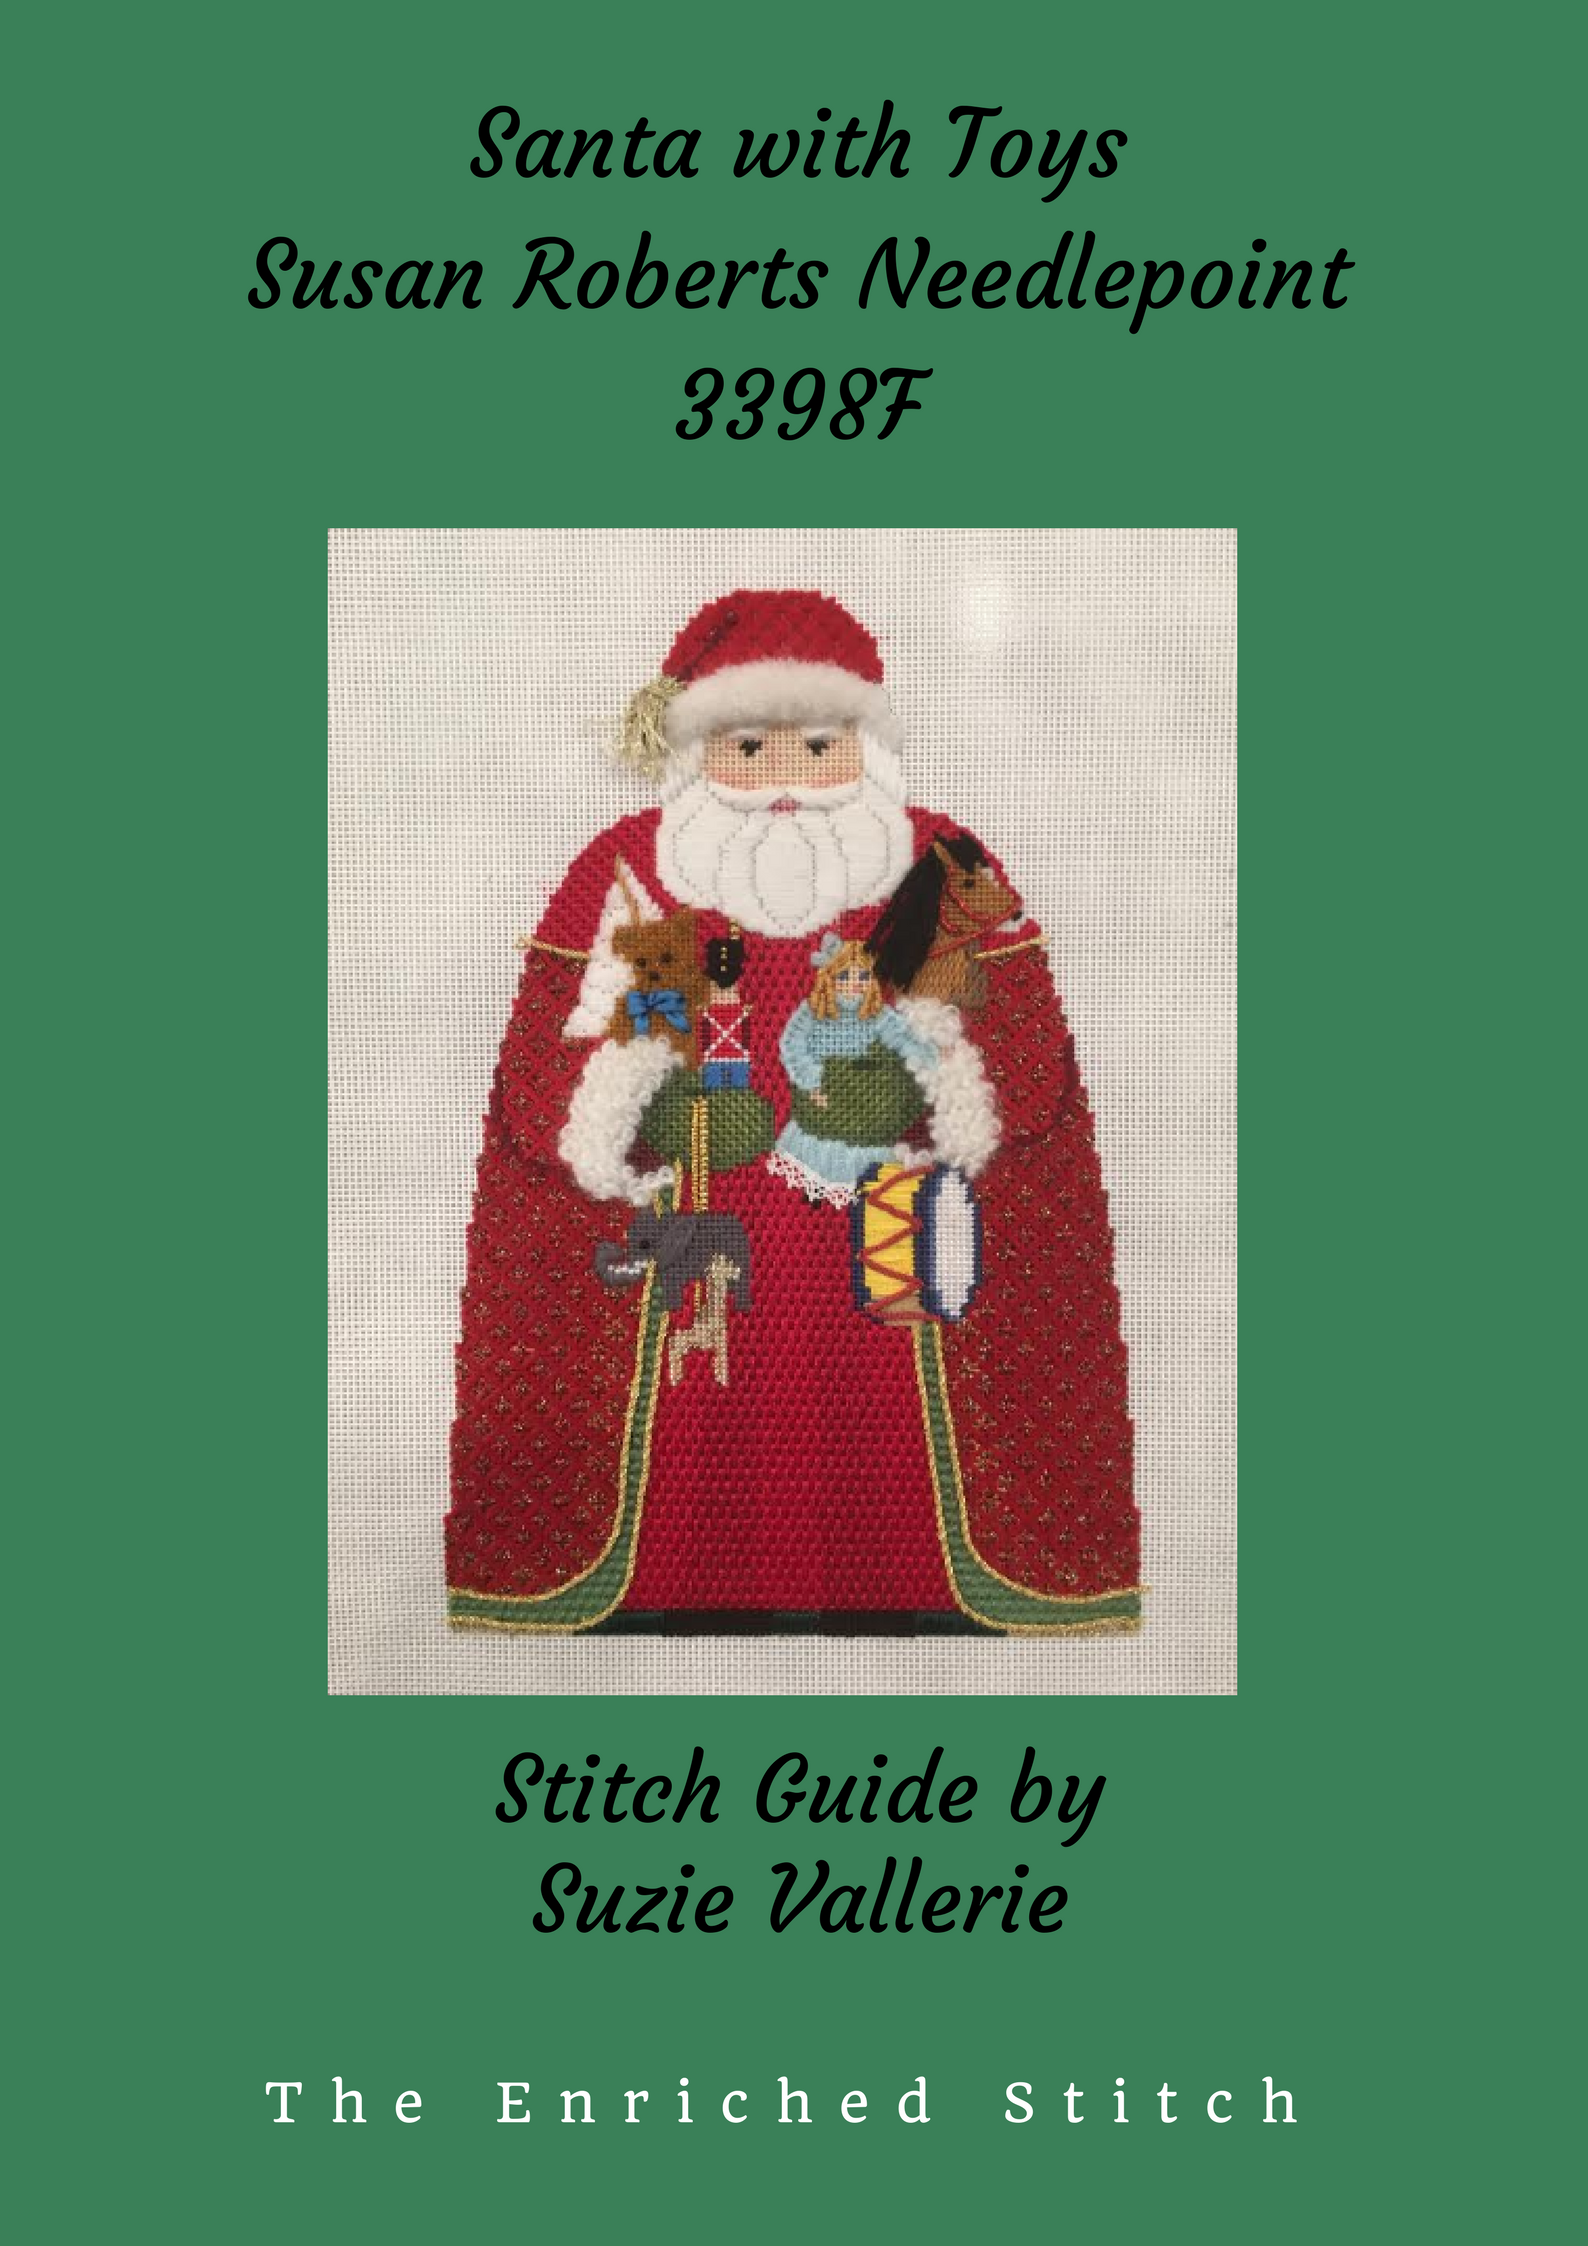 Super Snips – The Enriched Stitch